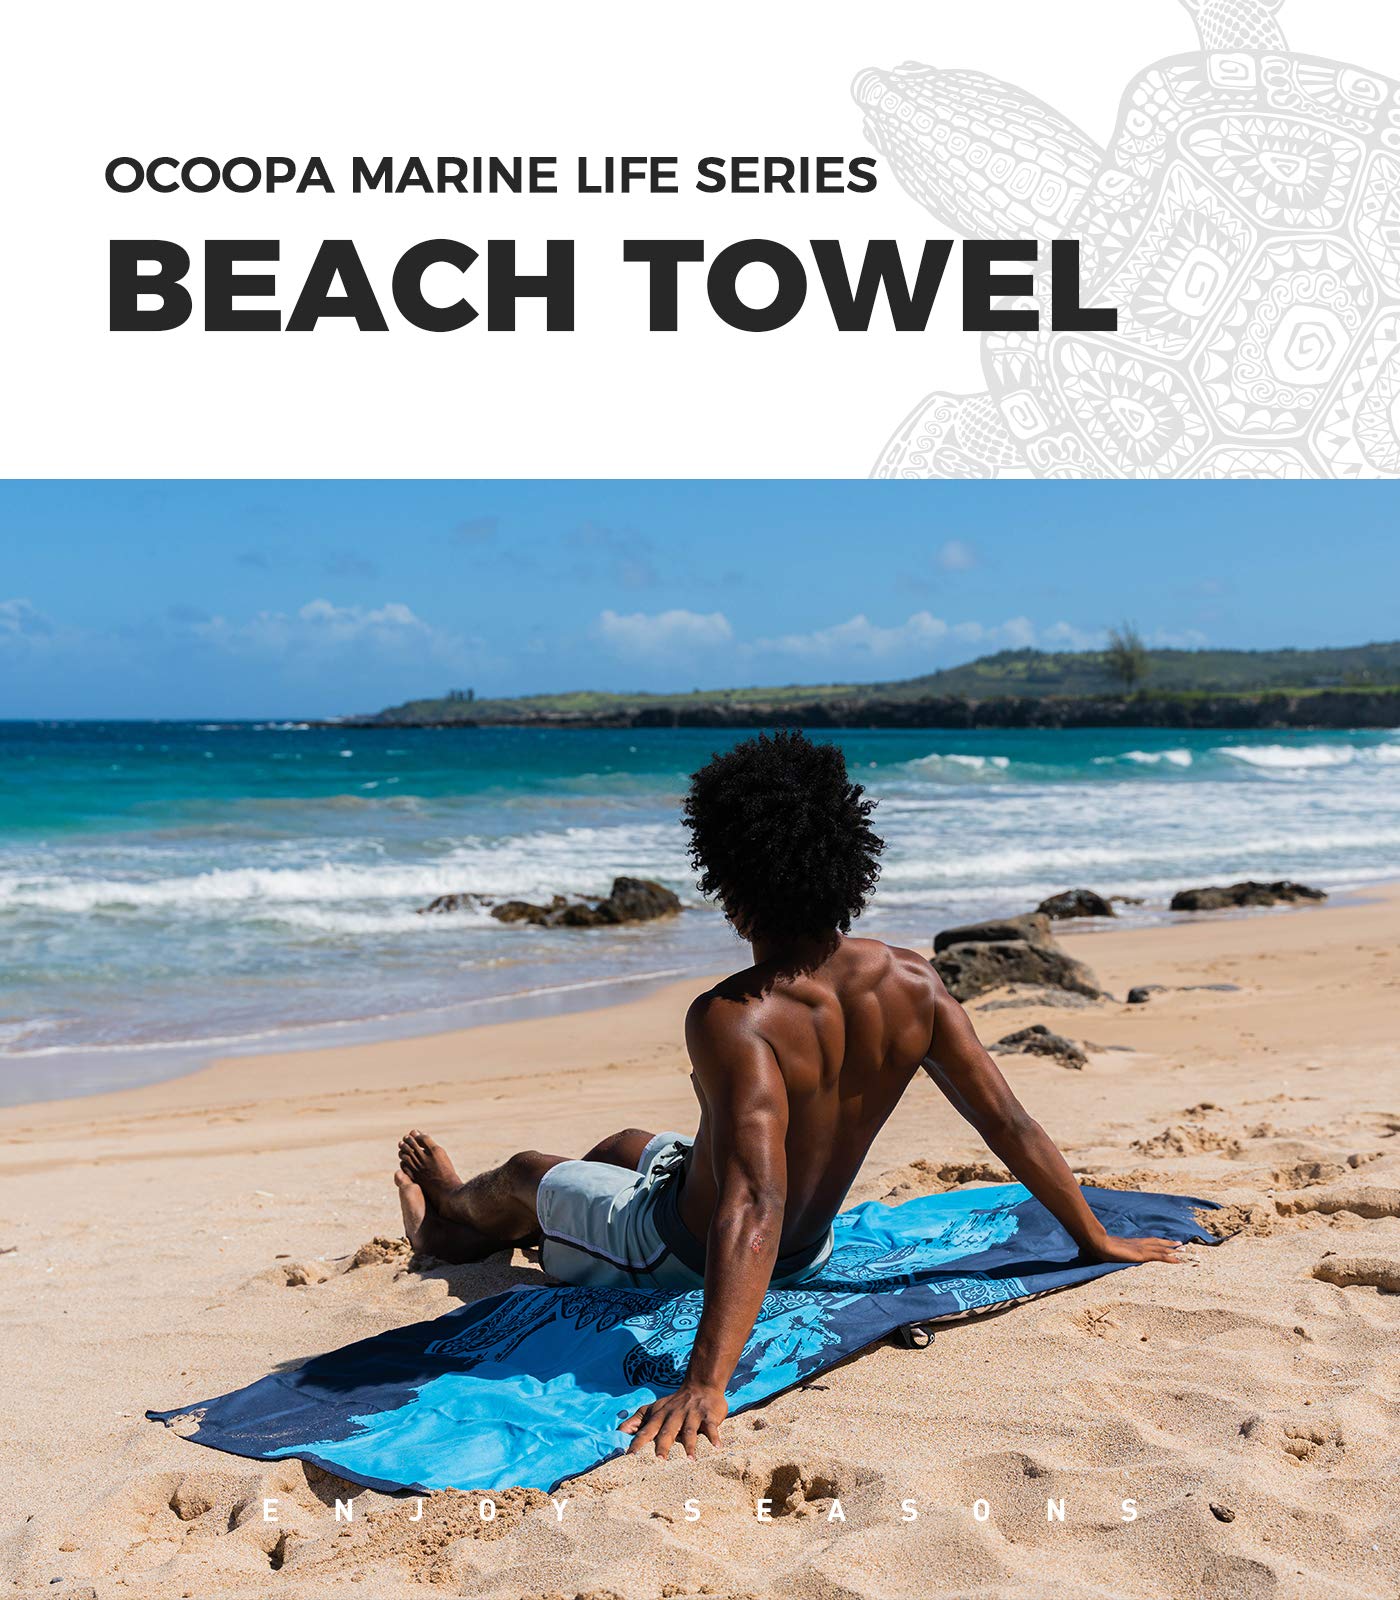 45% off OCOOPA Diveblues Sand Free Beach Towel only $10.99